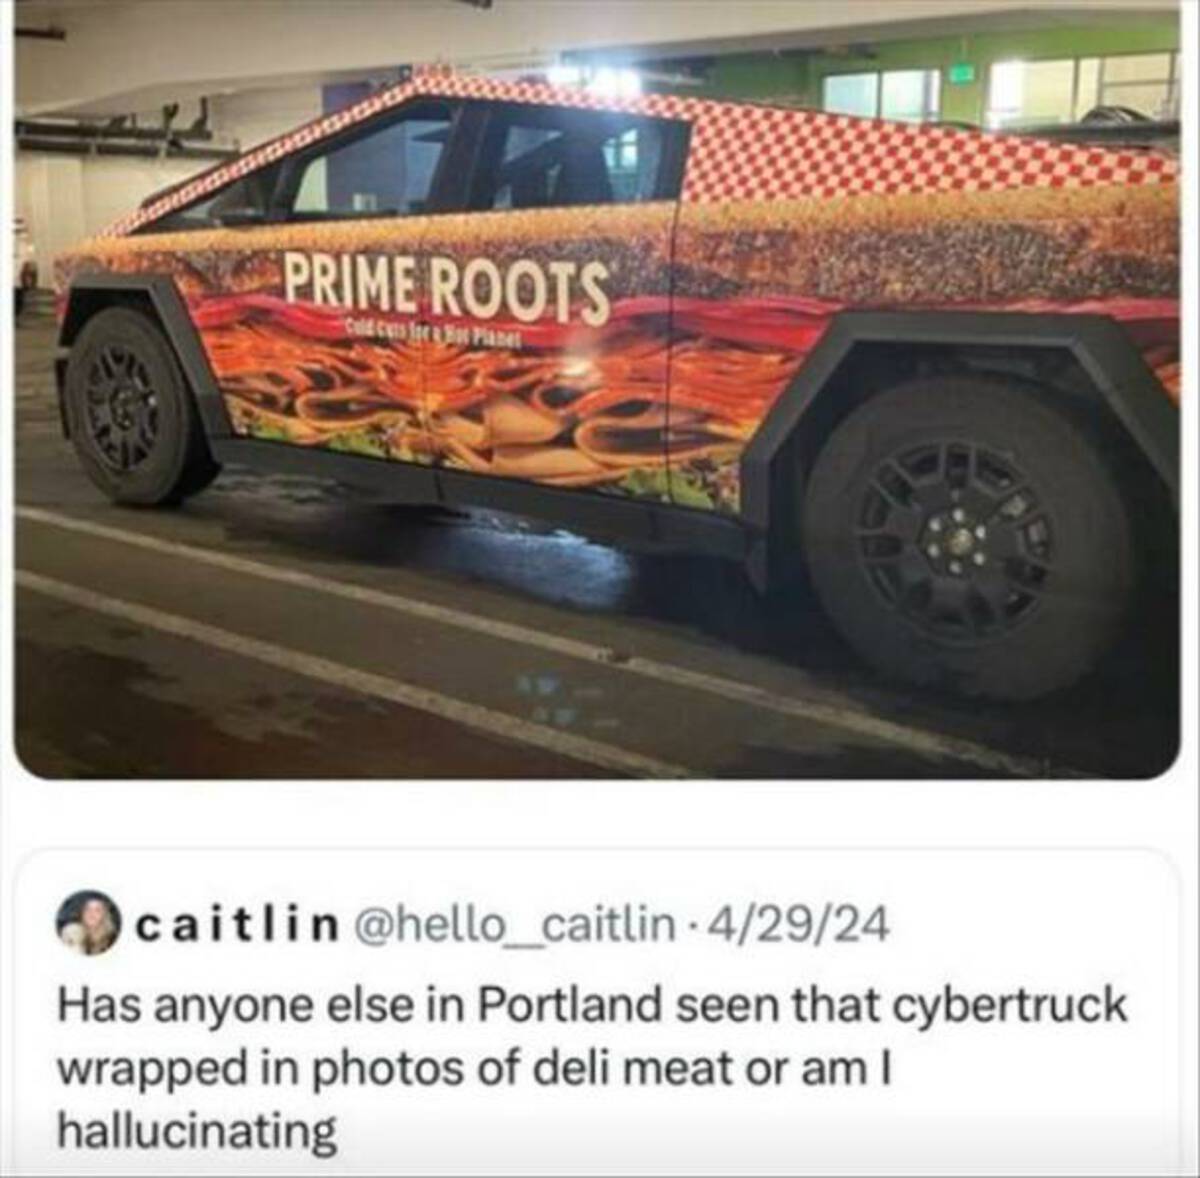 sports car - Prime Roots Cold Cuts Ipe & Hot Planet caitlin 42924 Has anyone else in Portland seen that cybertruck wrapped in photos of deli meat or am I hallucinating